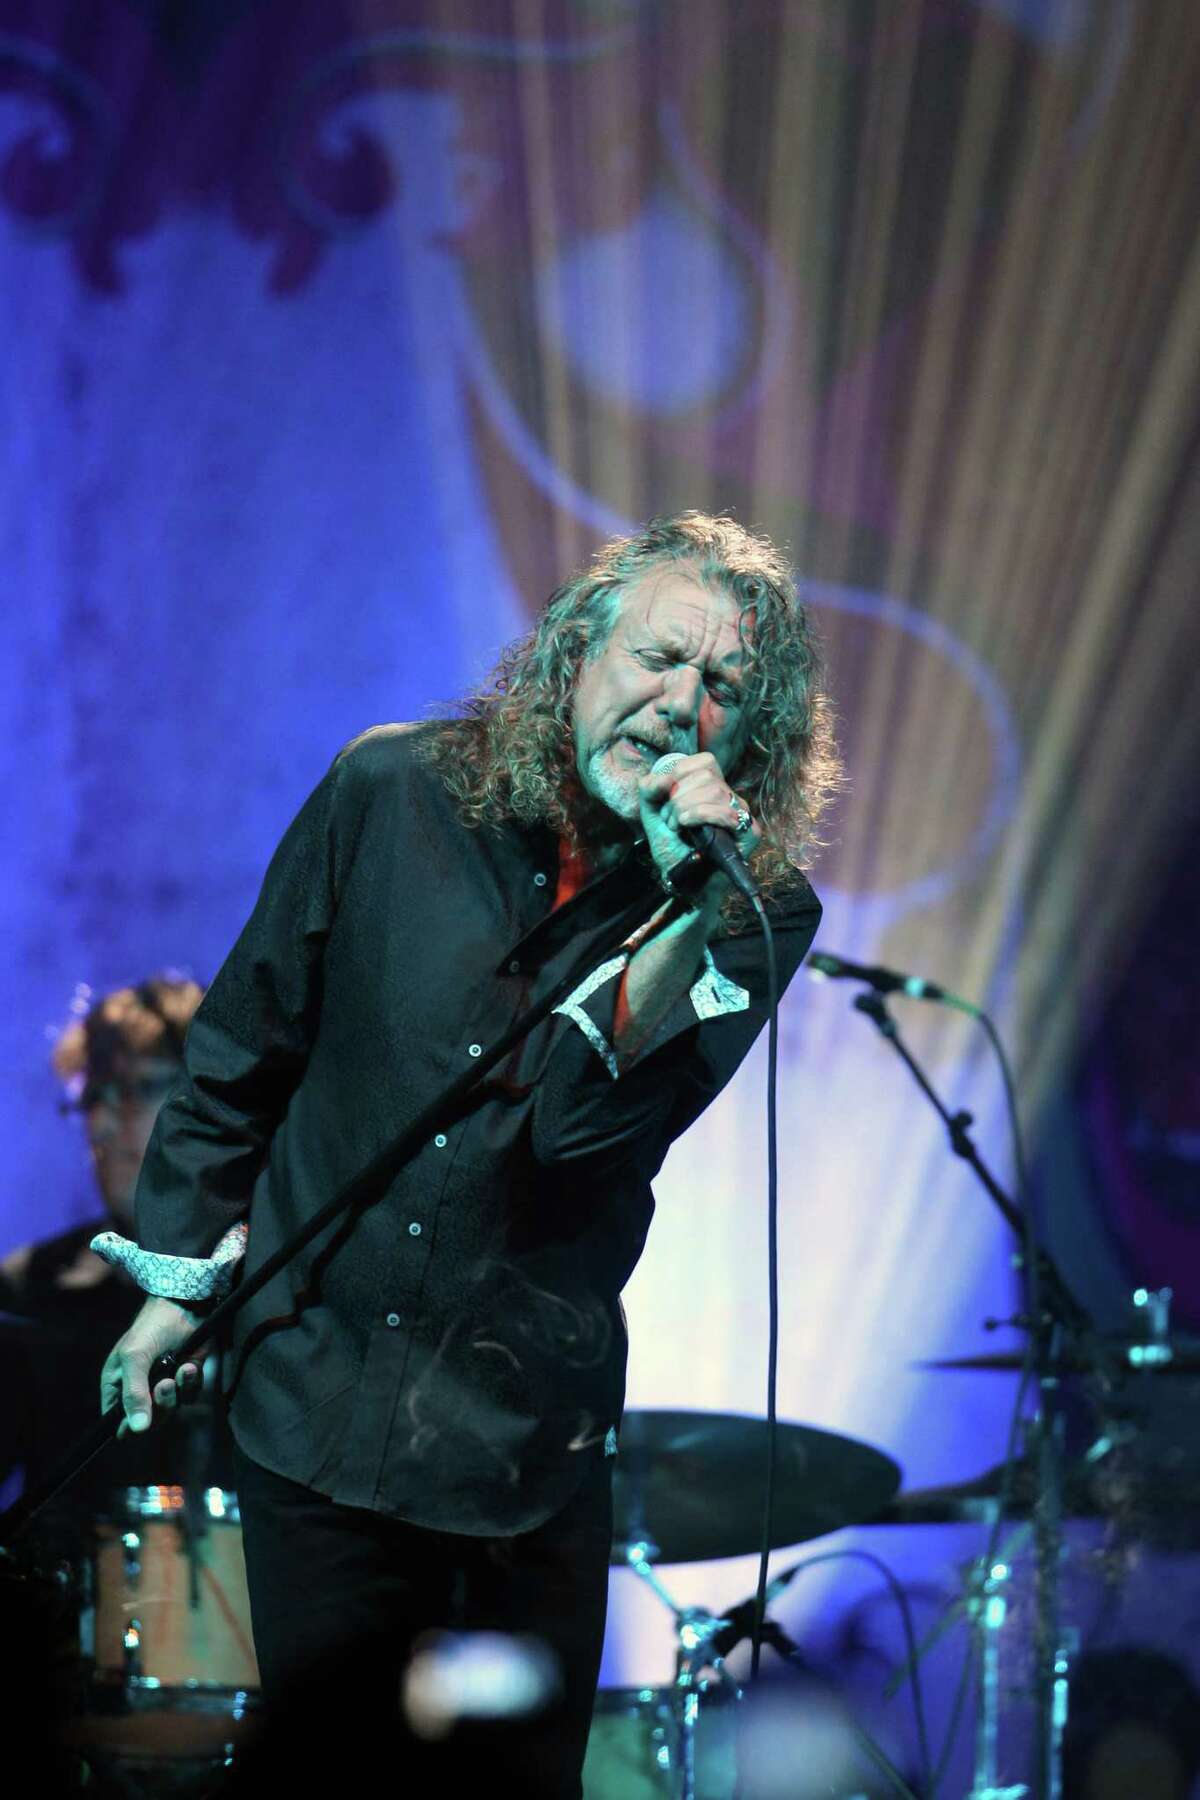 Robert Plant will bring his Sensational Space Shifters band to the Tobin Center on Thursday for a concert showcasing his love of world music, psychedelic rock, folk and African music.